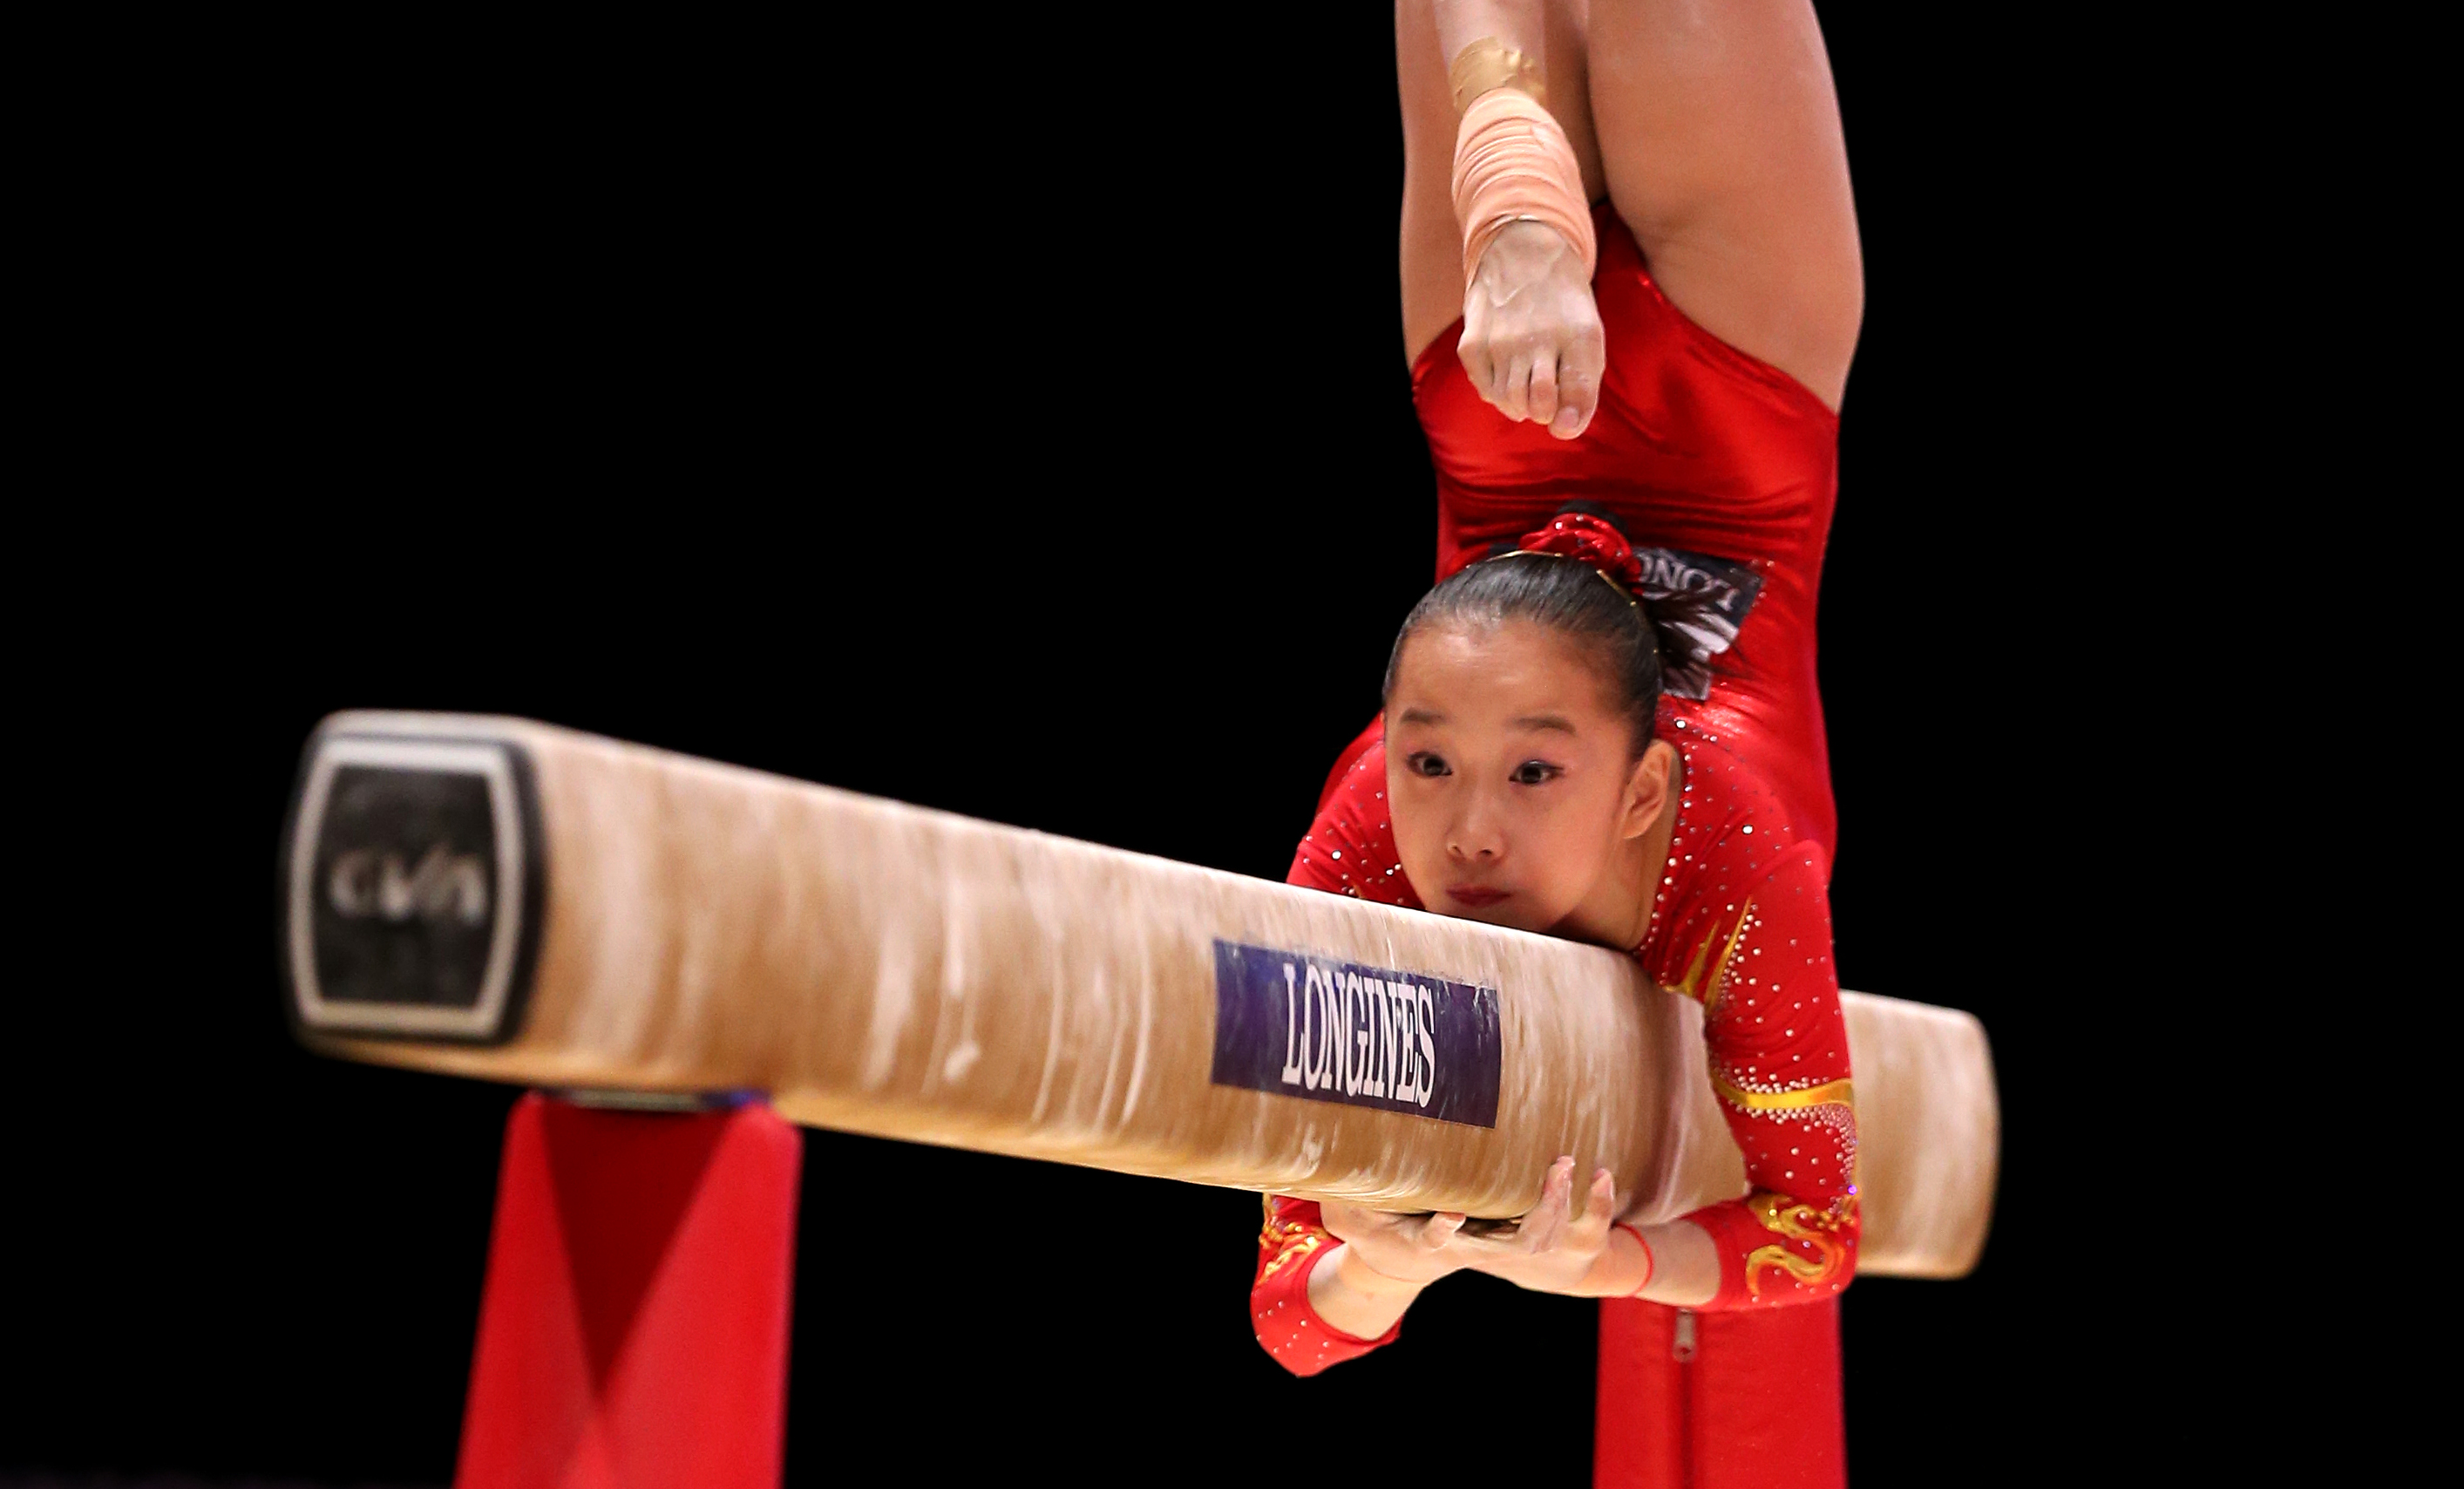 (151028) -- GLASGOW, Oct. 28, 2015 (Xinhua) -- Chinese gymnast Fan Yilin competes during the Balance Beam competition of the women's team final at the 46th World Artistic Gymnastics Championships at the SSE Hydro Arena in Glasgow, Scotland, Great Britain on Oct. 27, 2015. China won the silver medal. (Xinhua/Han Yan)